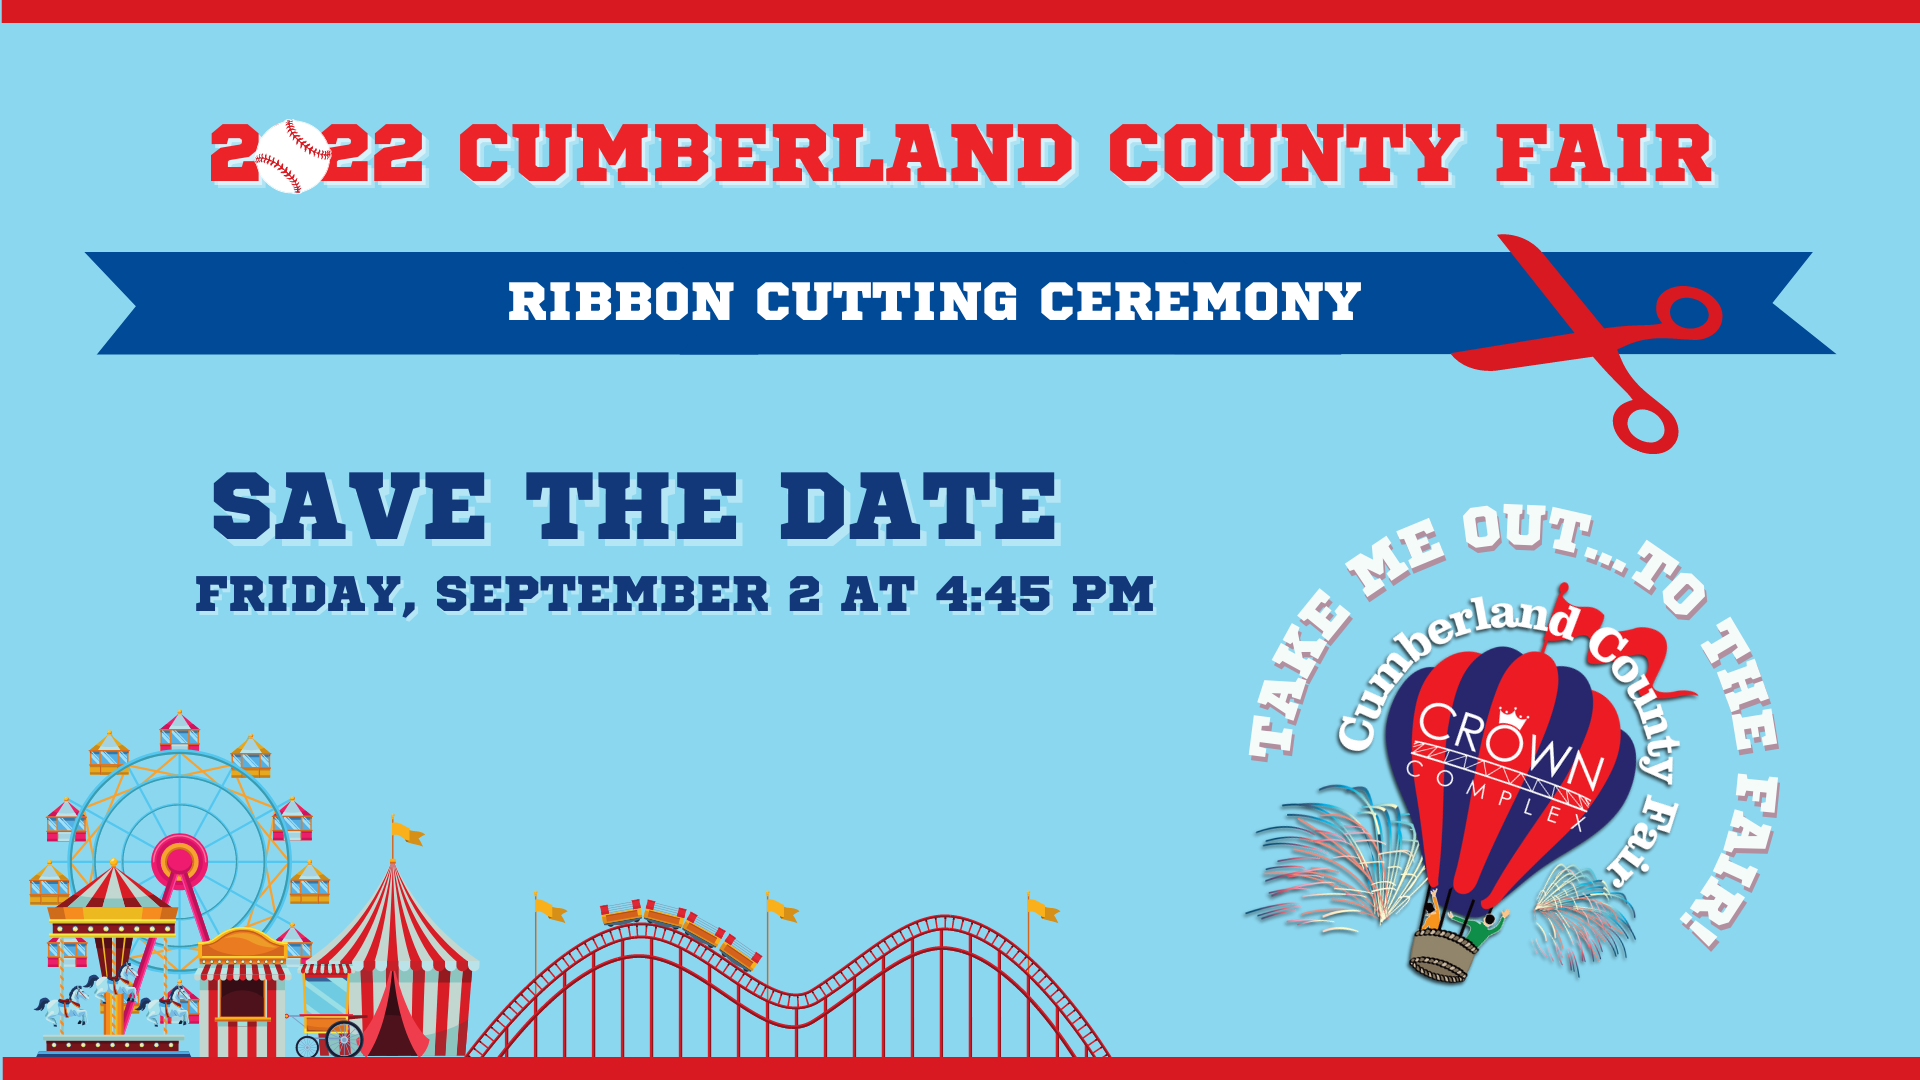 Copy of Cumberland County Fair - CityView Full Page (810 × 372 px) (Facebook Event Cover) (1).png